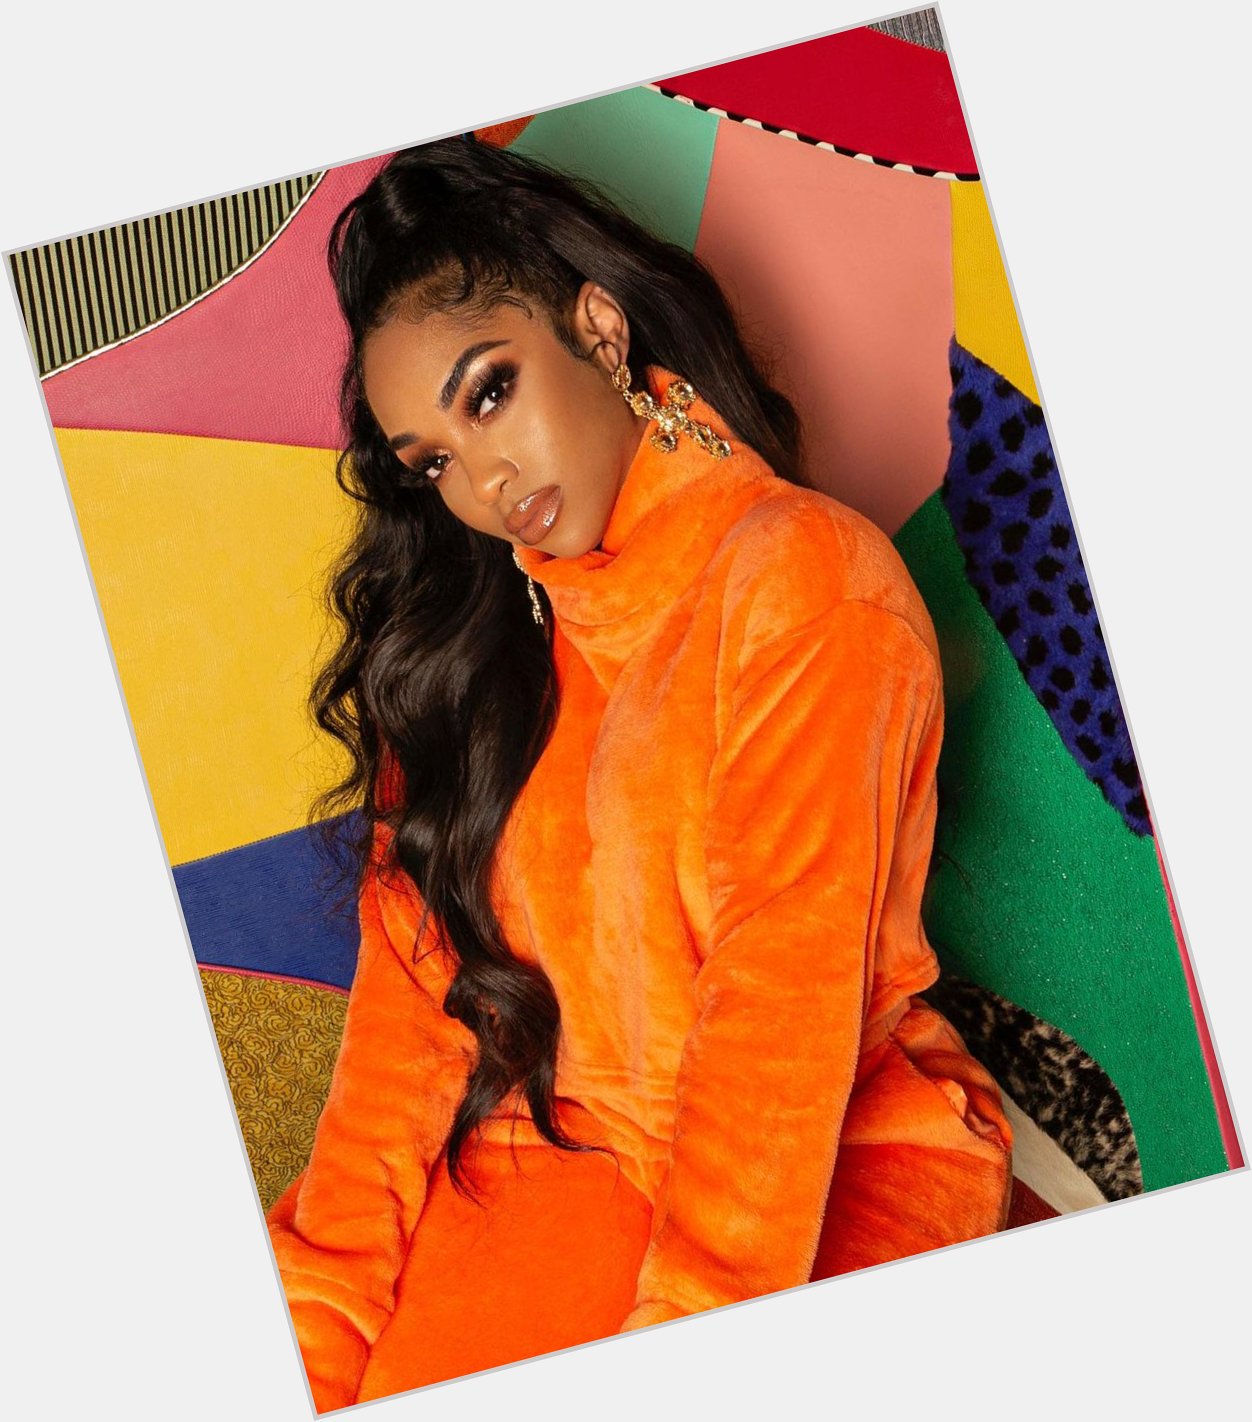 Happy Birthday to What are your top 3 songs by Brooke Valentine? 